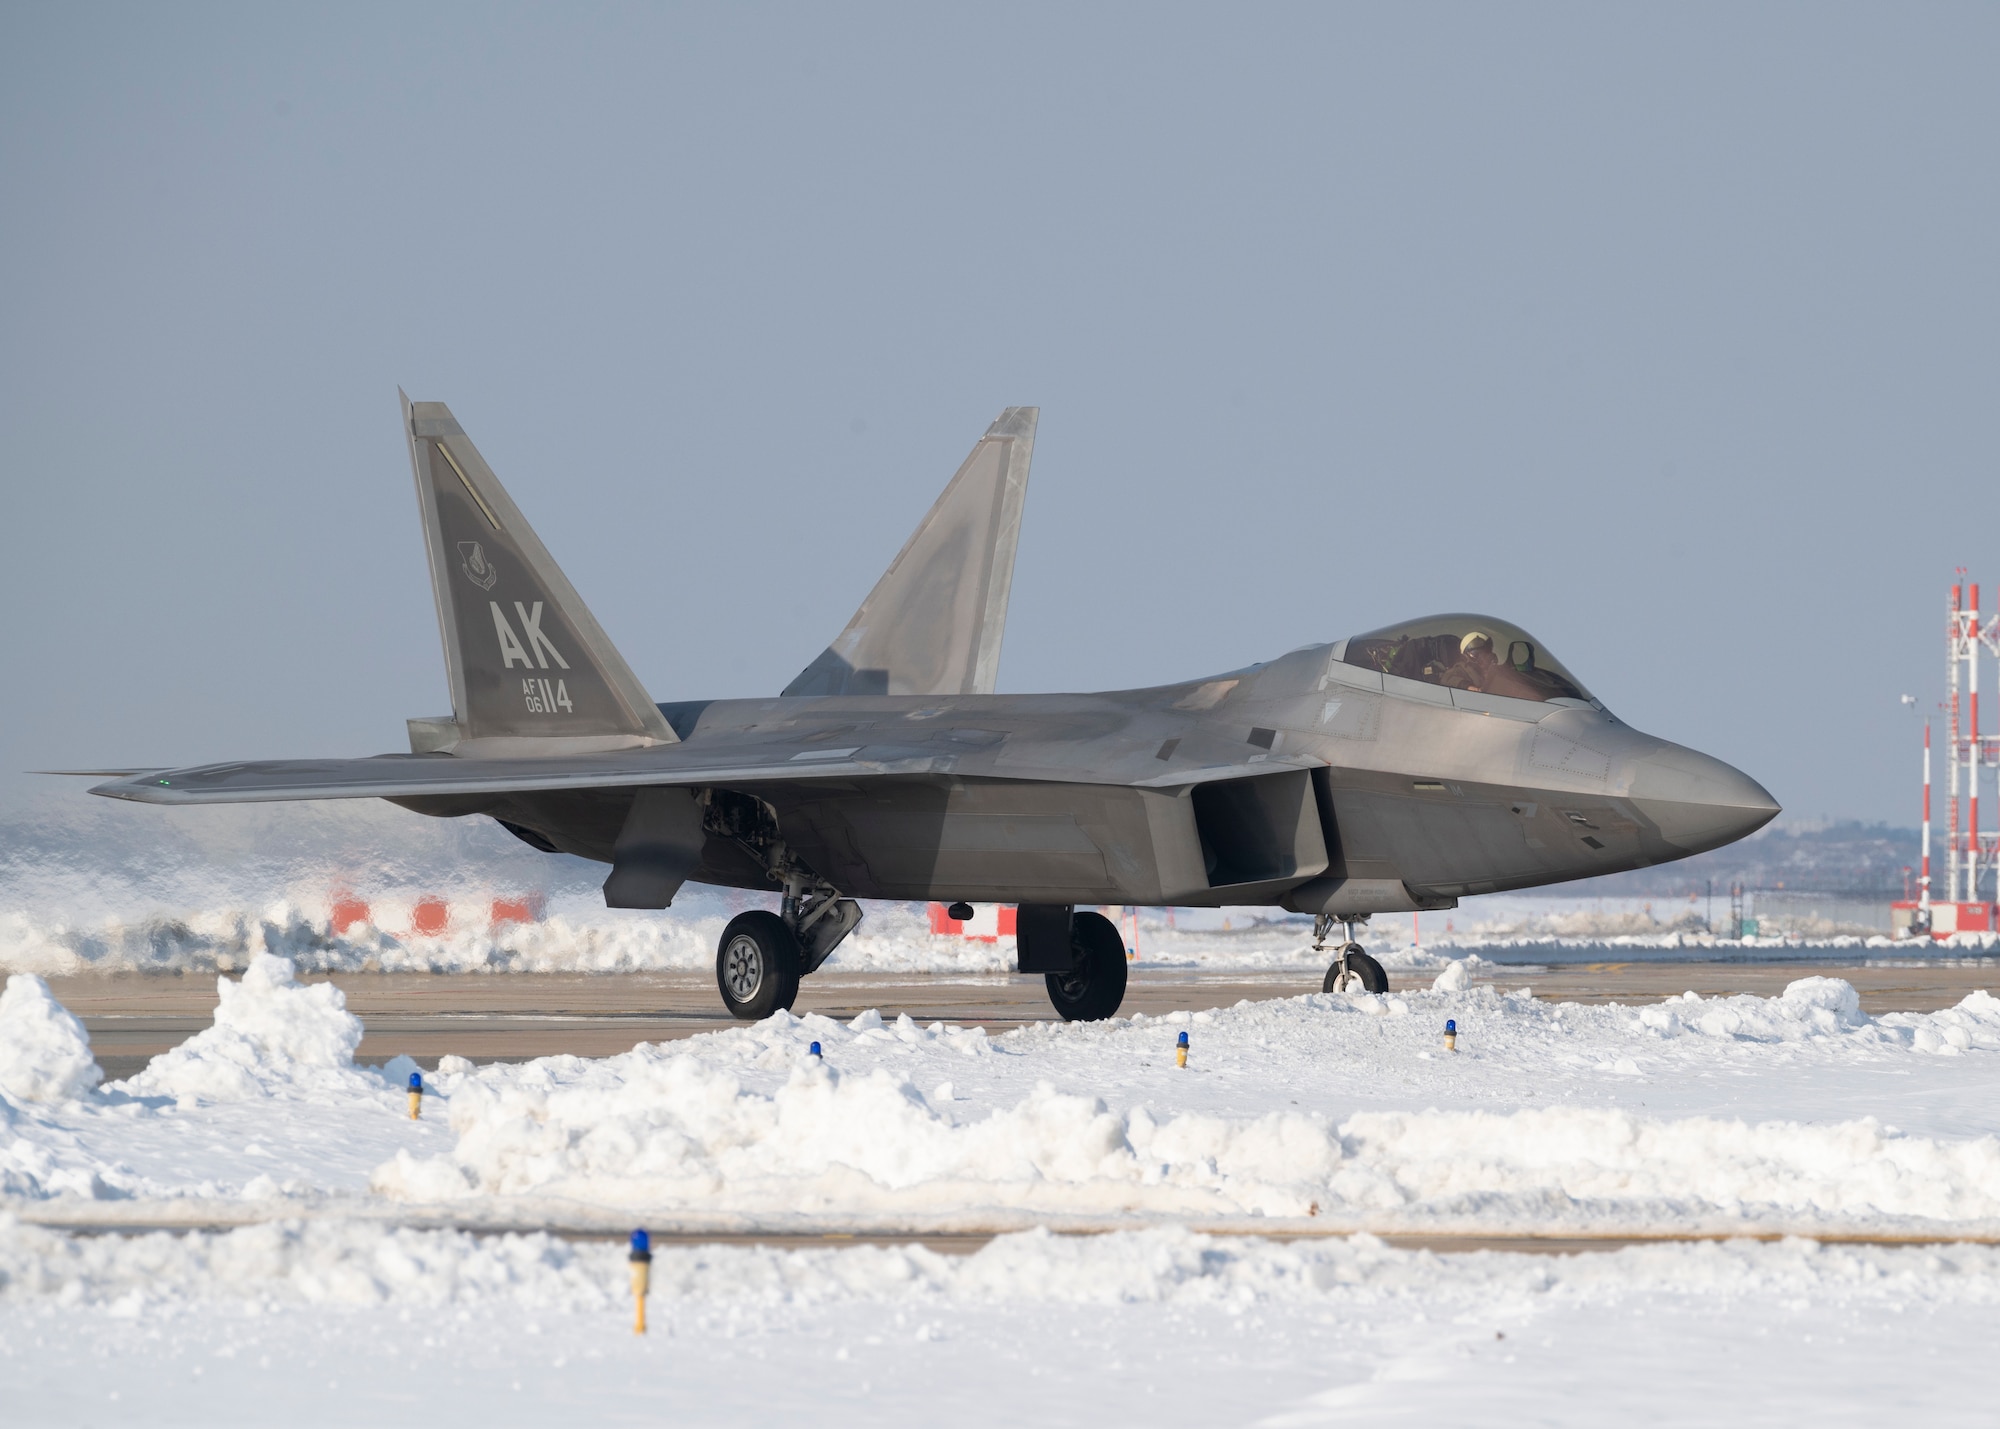 An F-22 Raptor assigned to the 525th Fighter Squadron out of Joint-Base Elmendorf-Richardson, Alaska, taxis during bilateral training event IRON SHADOW at Kunsan Air Base, Republic of Korea, Dec. 20, 2022.